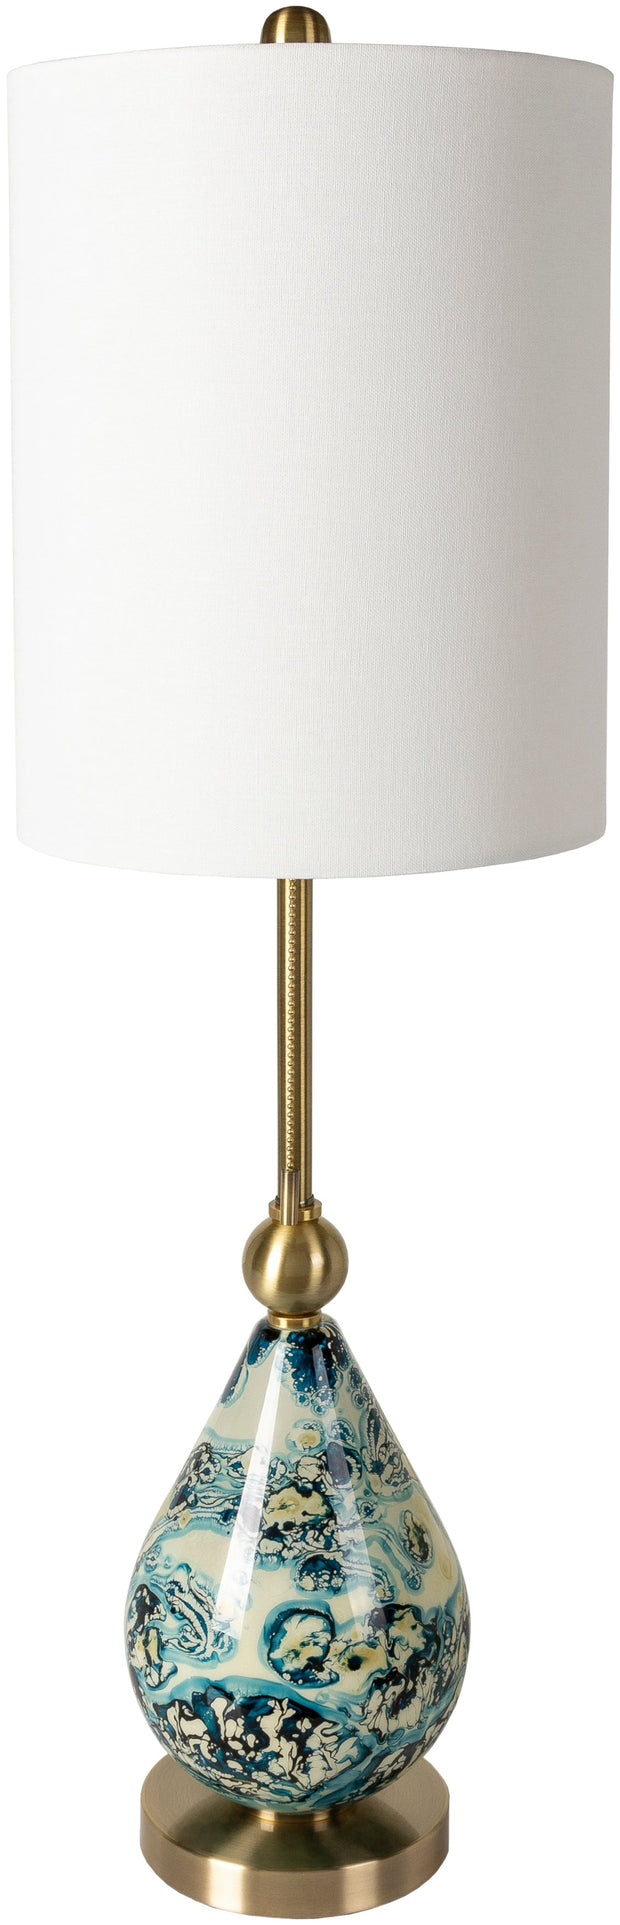 snicarte table lamps by surya snr 001 1